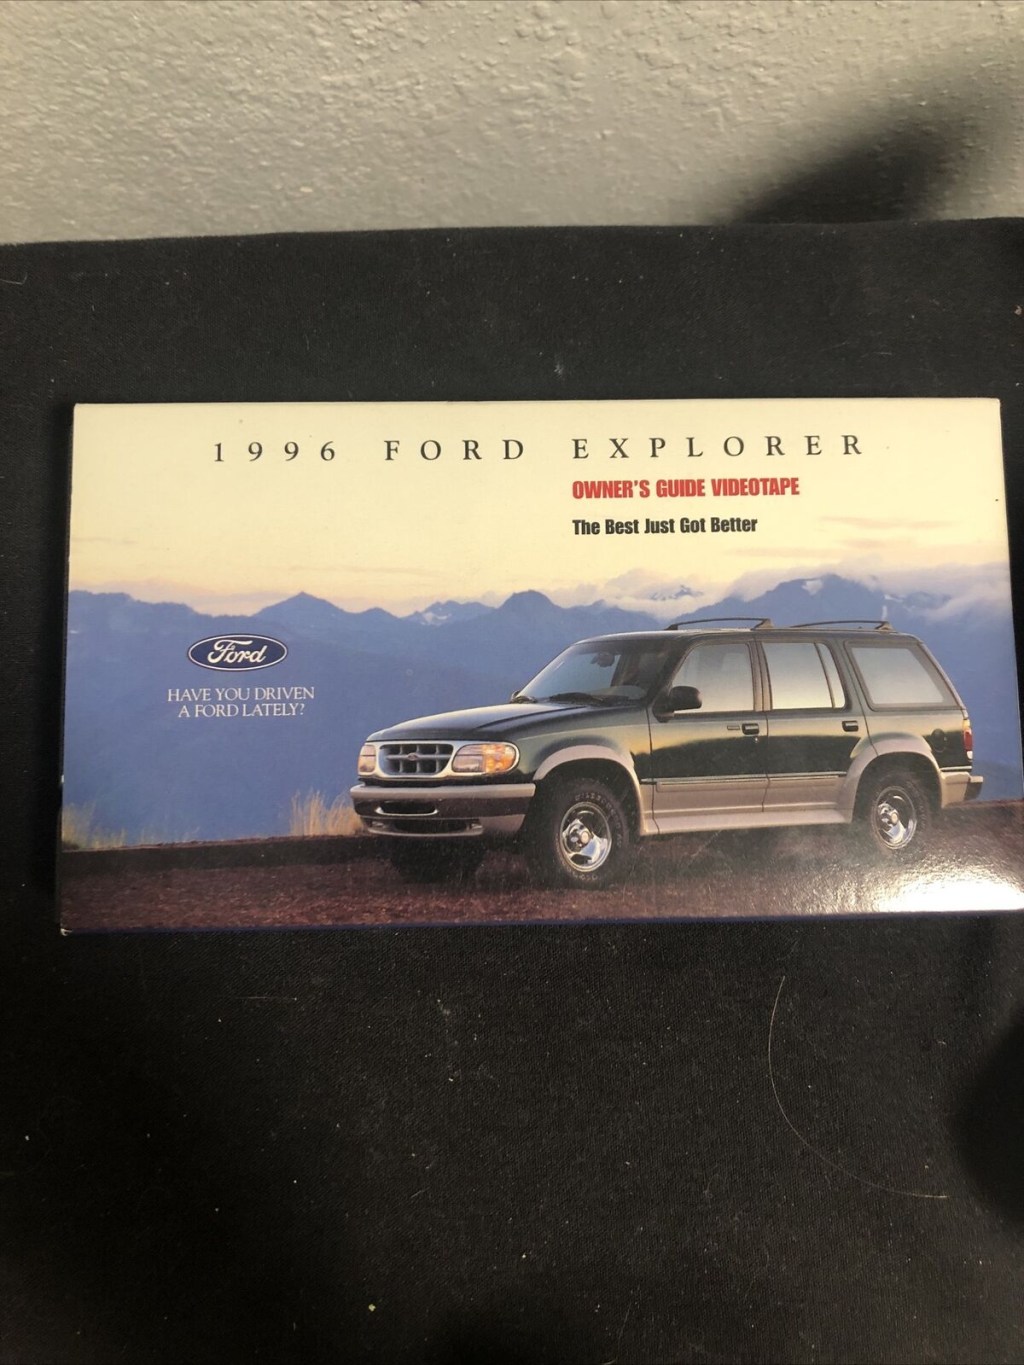 Picture of: FORD EXPLORER VHS VIDEO TAPE AND OWNERS GUIDE OWNERS MANUAL OEM